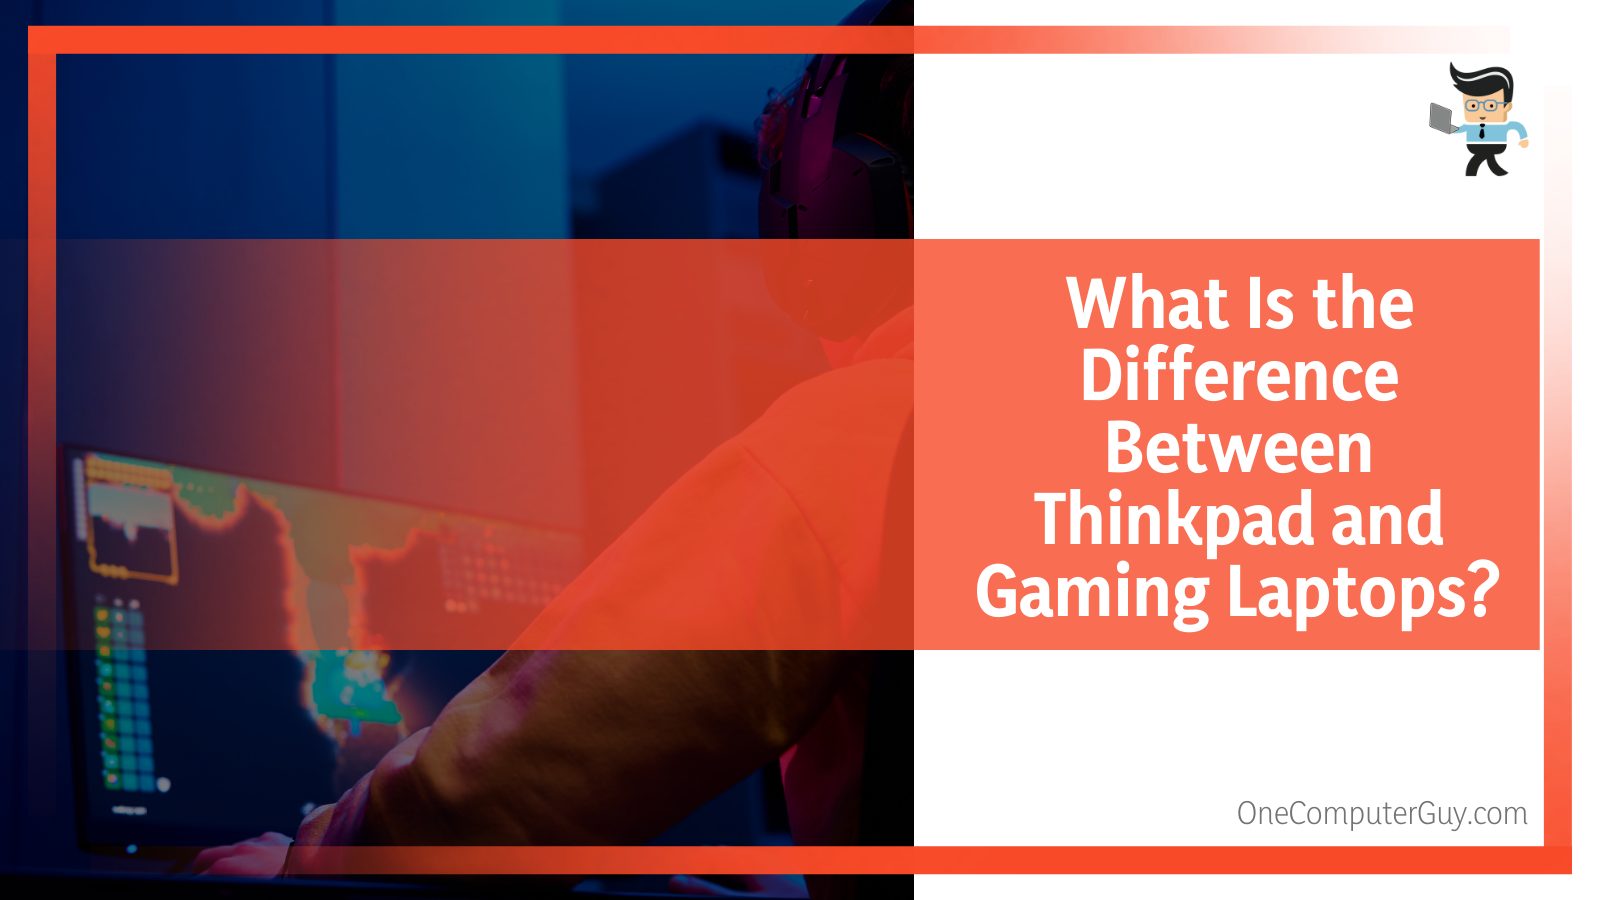 What Is the Difference Between Thinkpad and Gaming Laptops